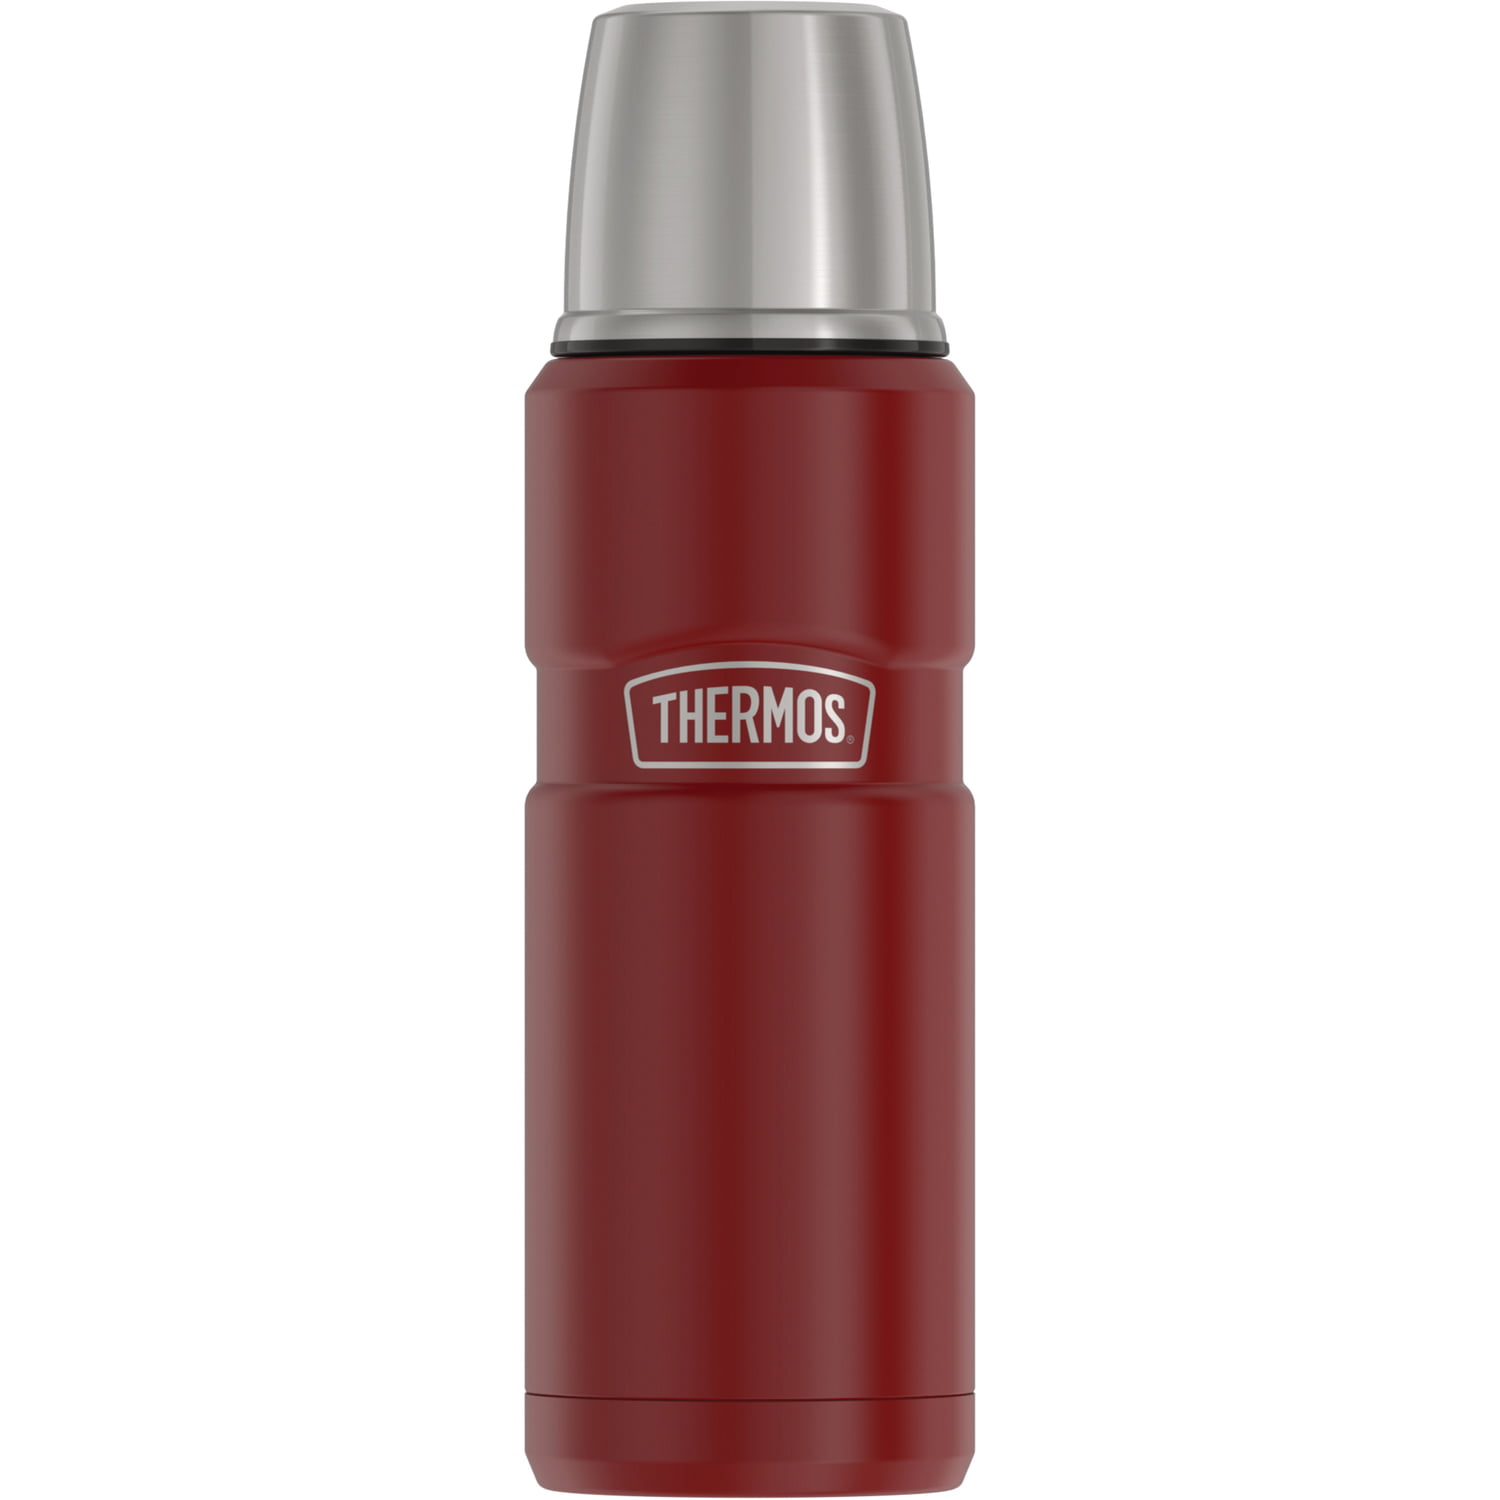 Thermos 16 oz Guardian Stainless Steel Vacuum Insulated Direct Drink Bottle